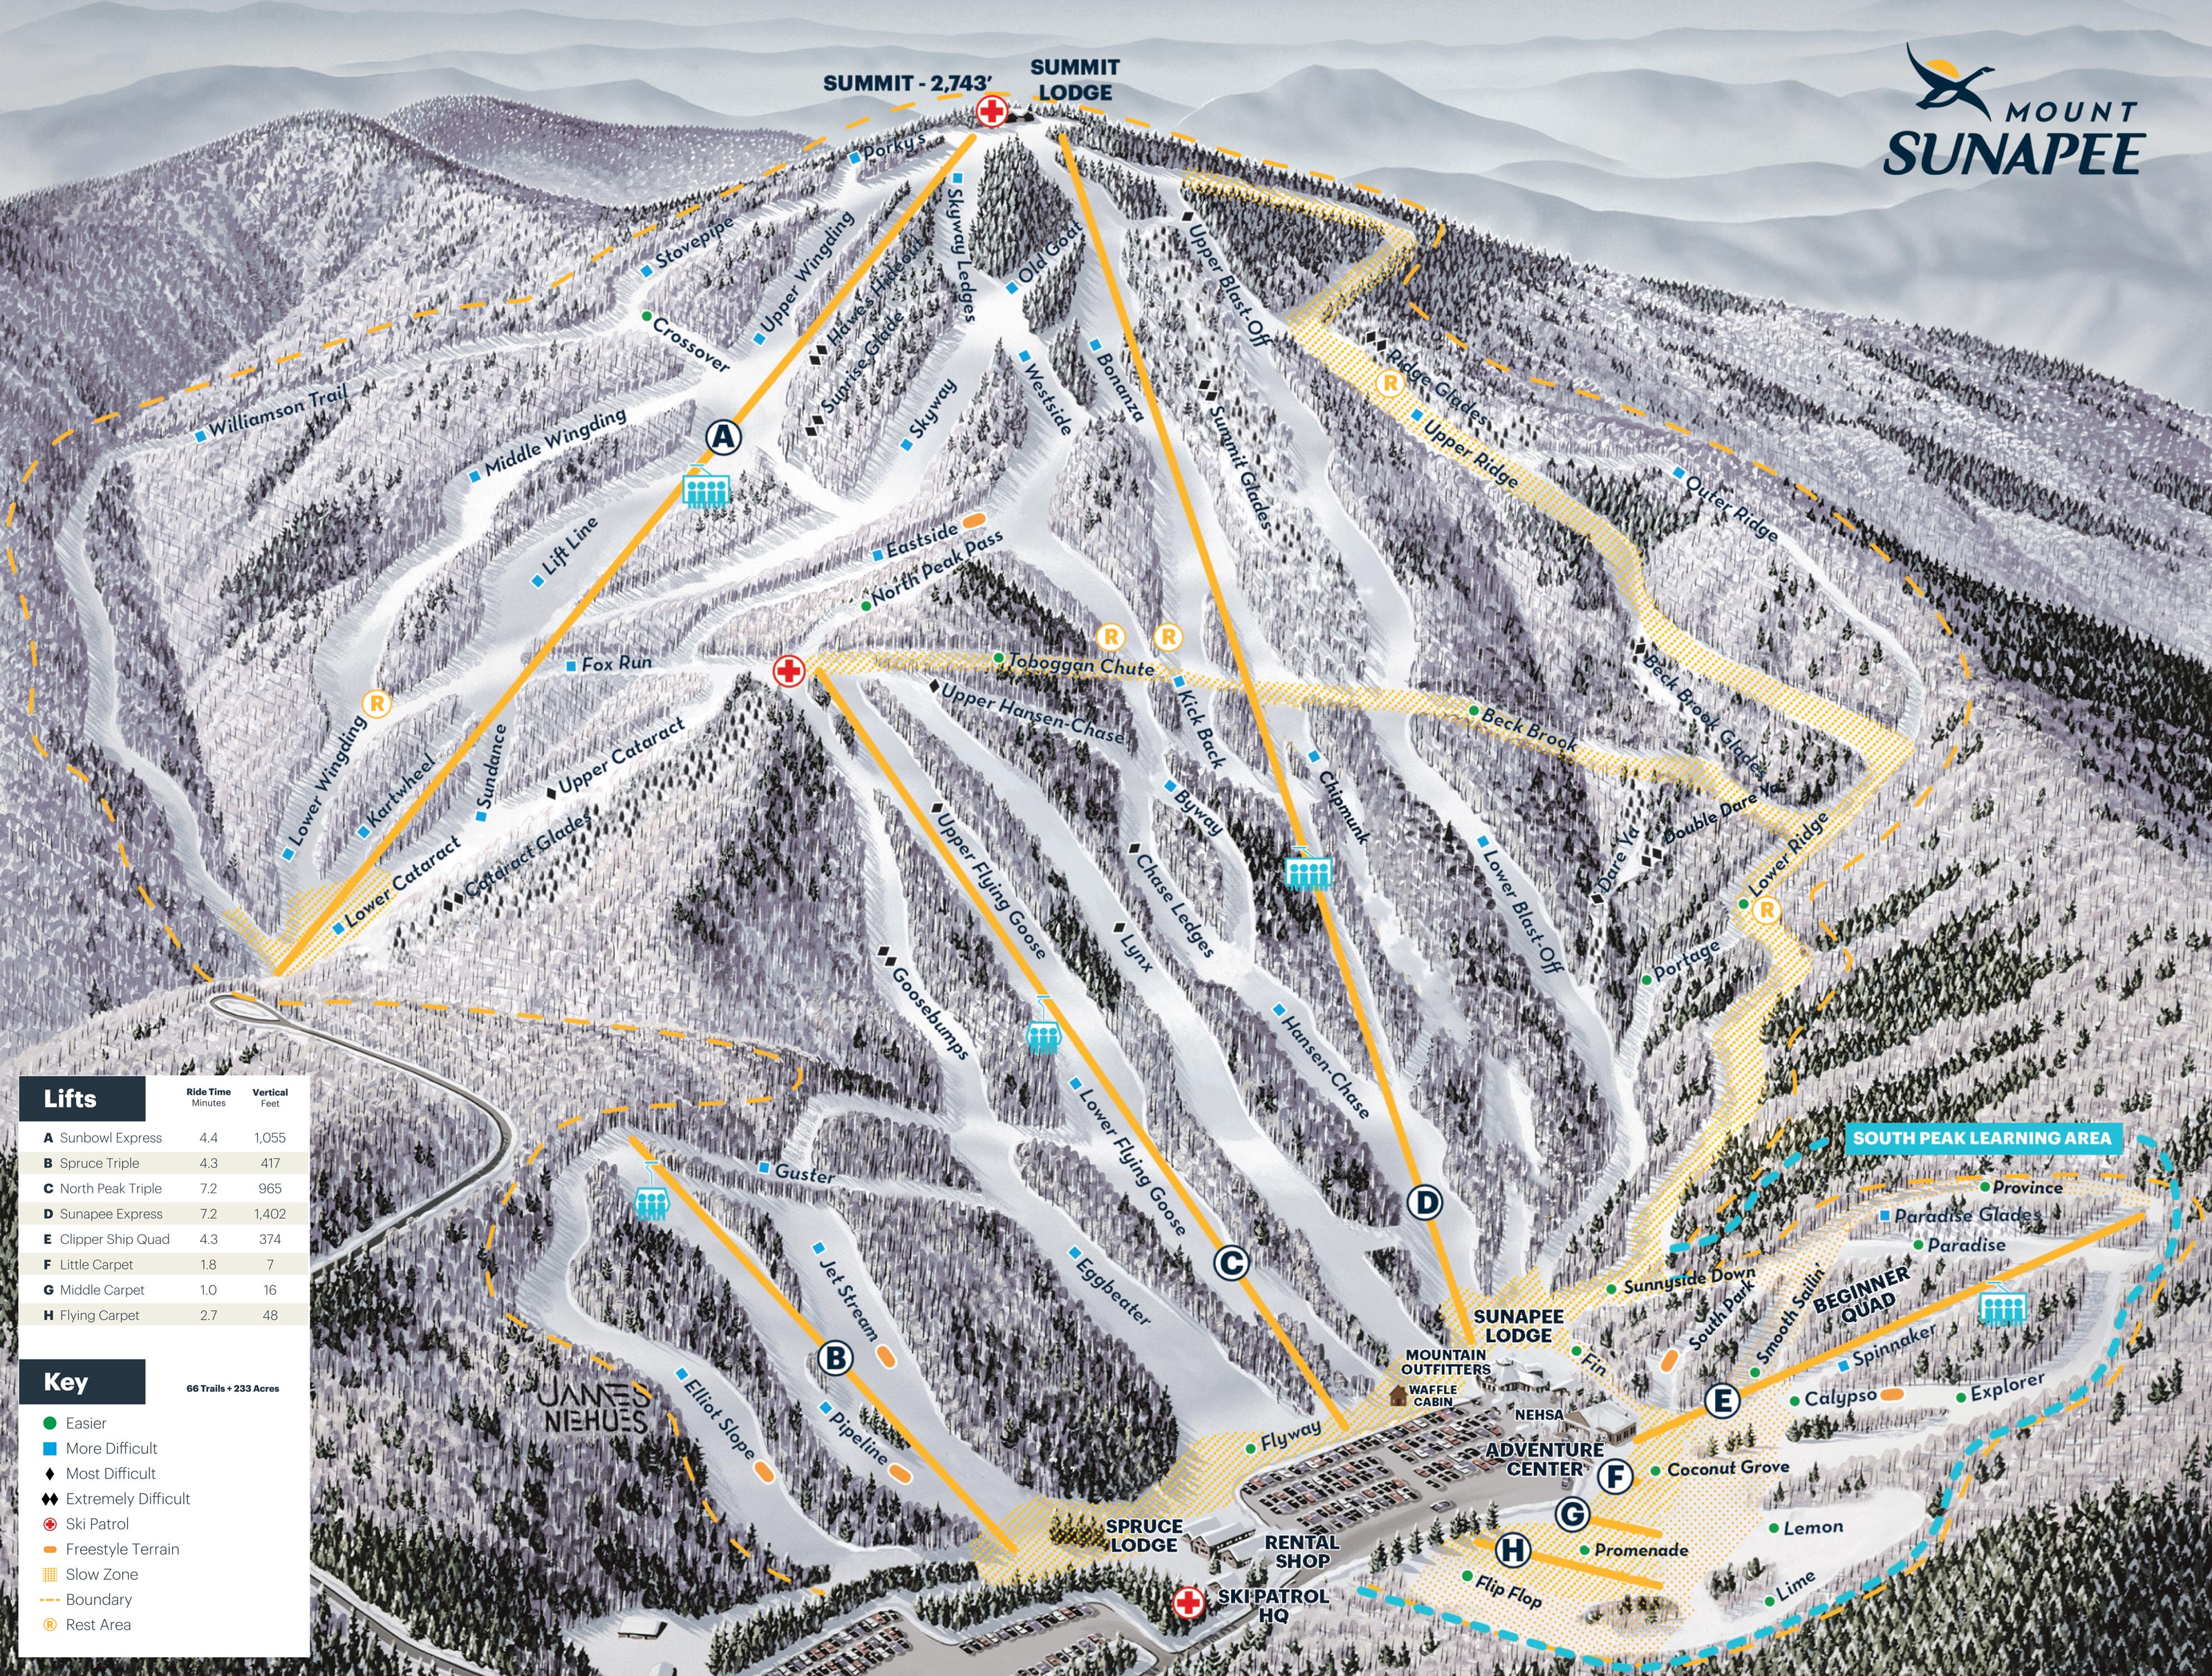 Mount Sunapee Ski Trail Map With Legend Wall Mural - Murals Your Way